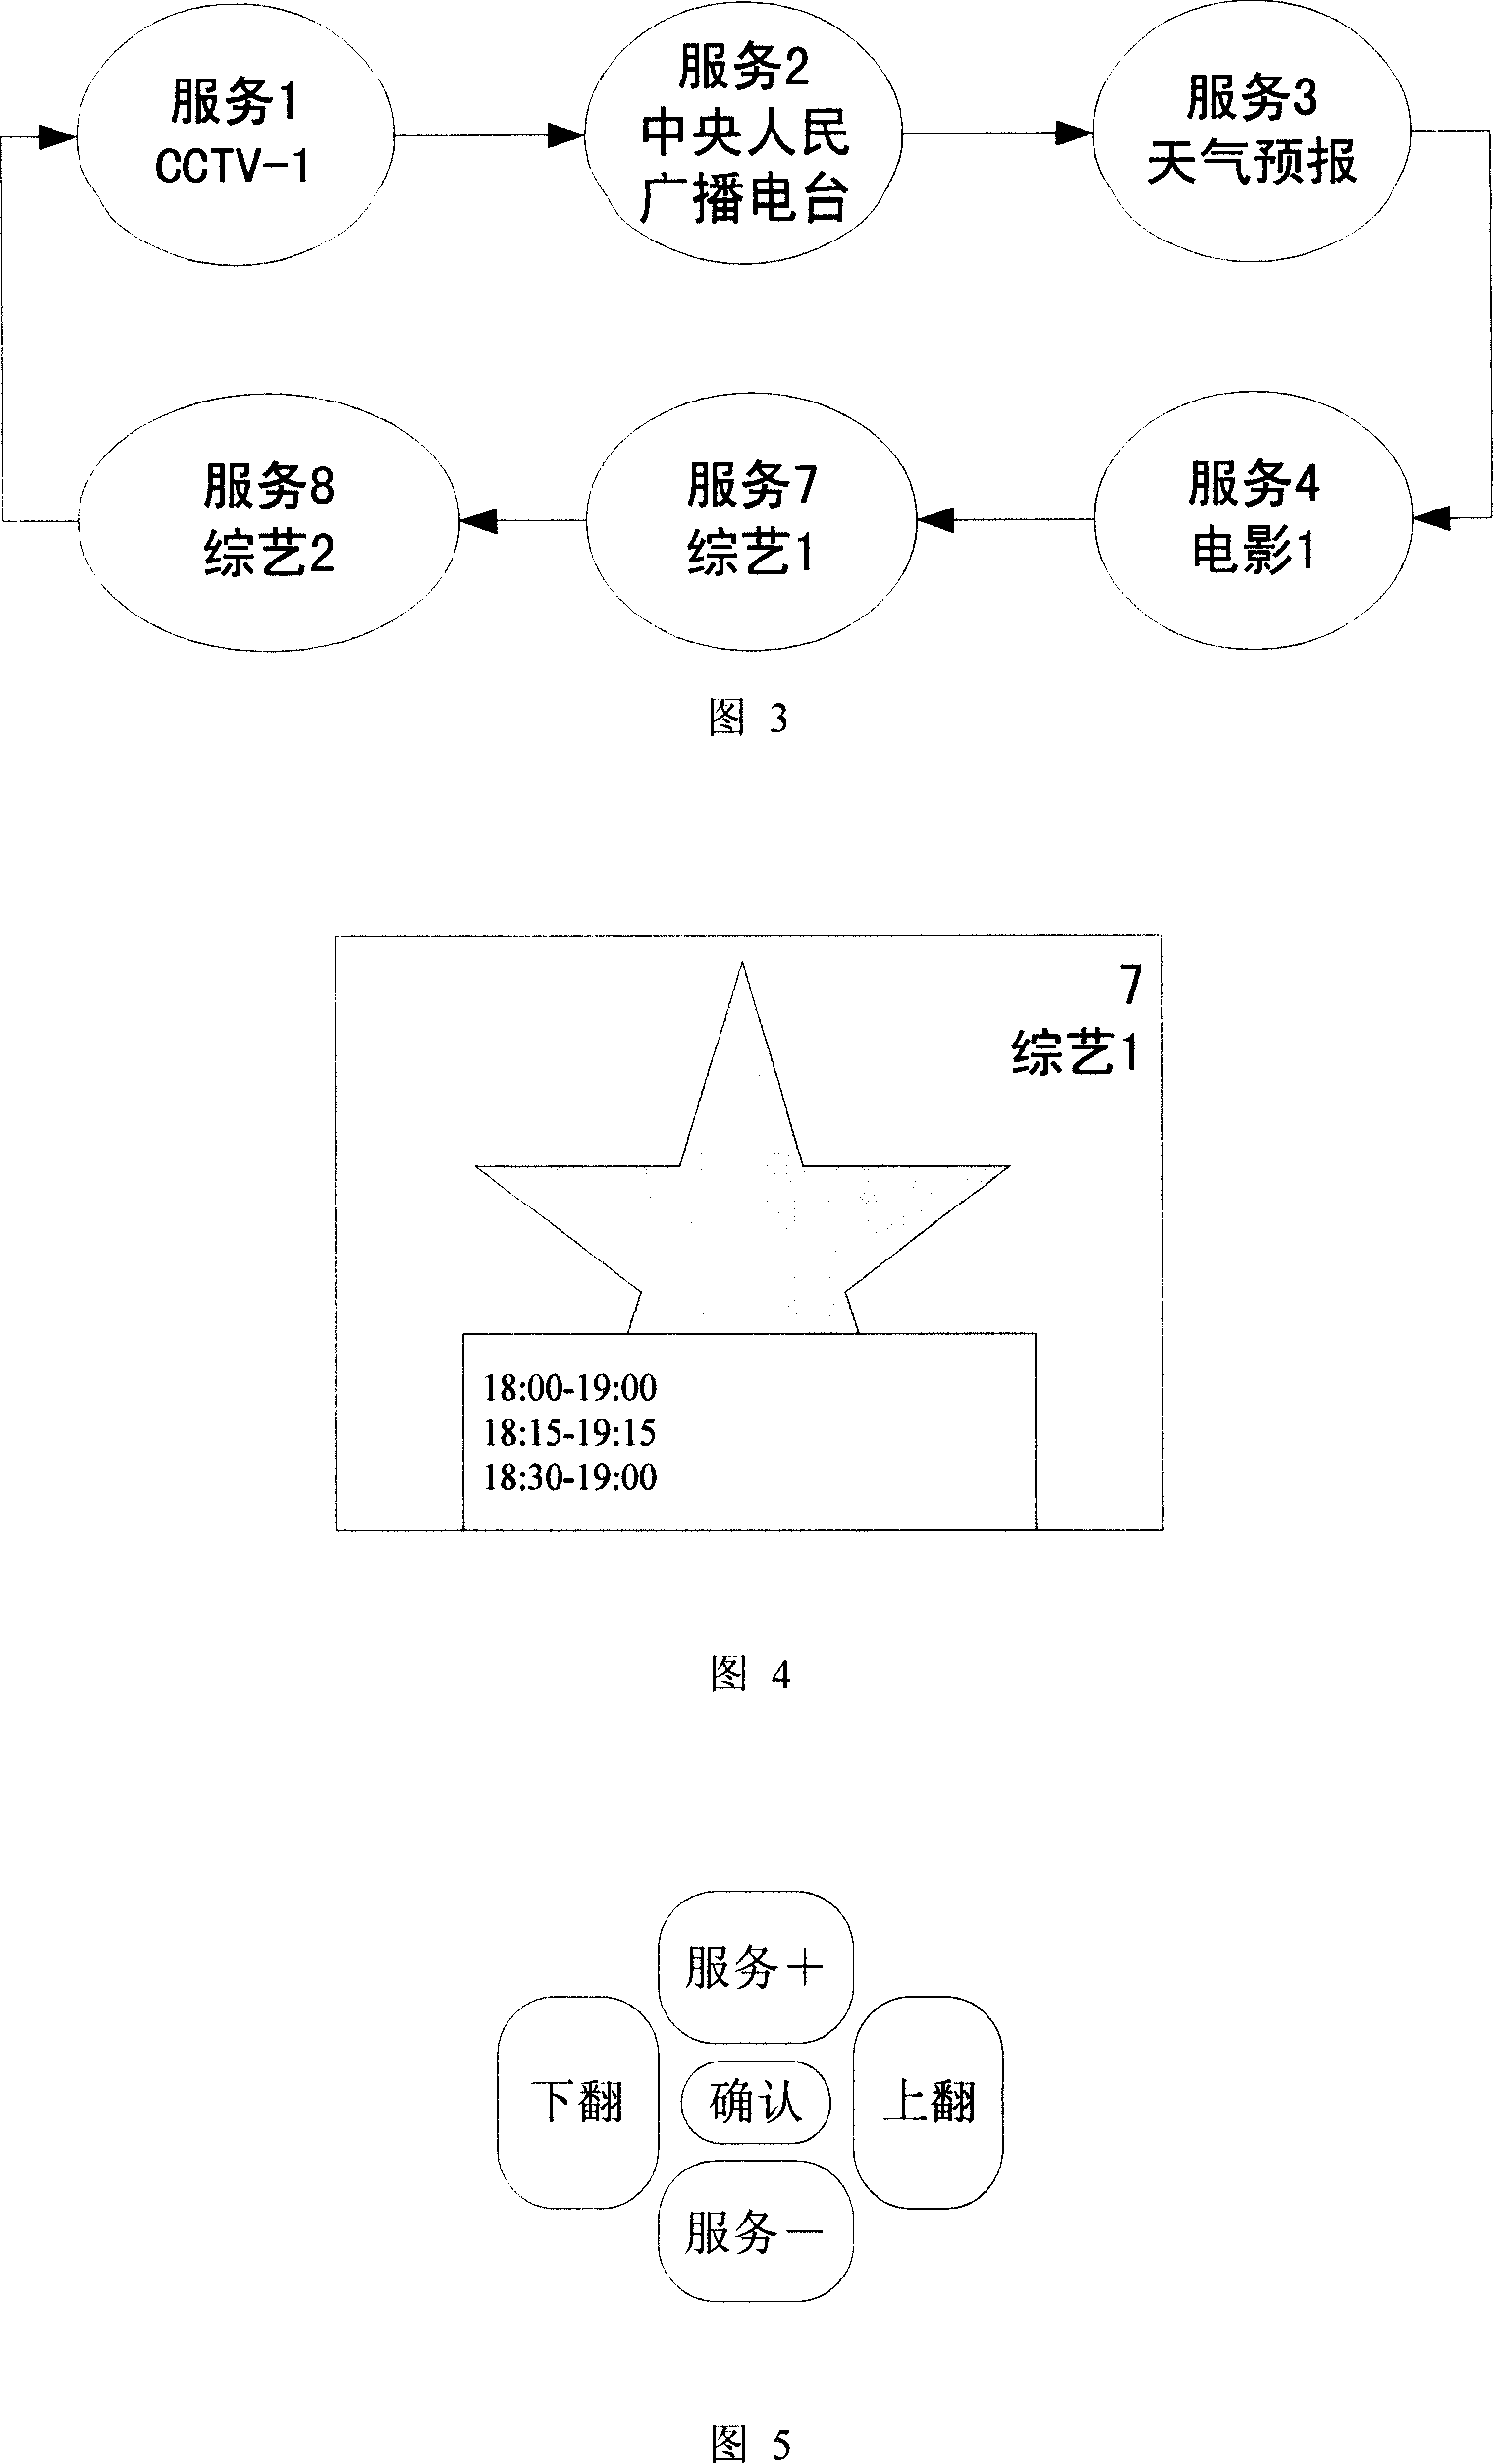 Digital broadcasting television service switching mechanism and switching method